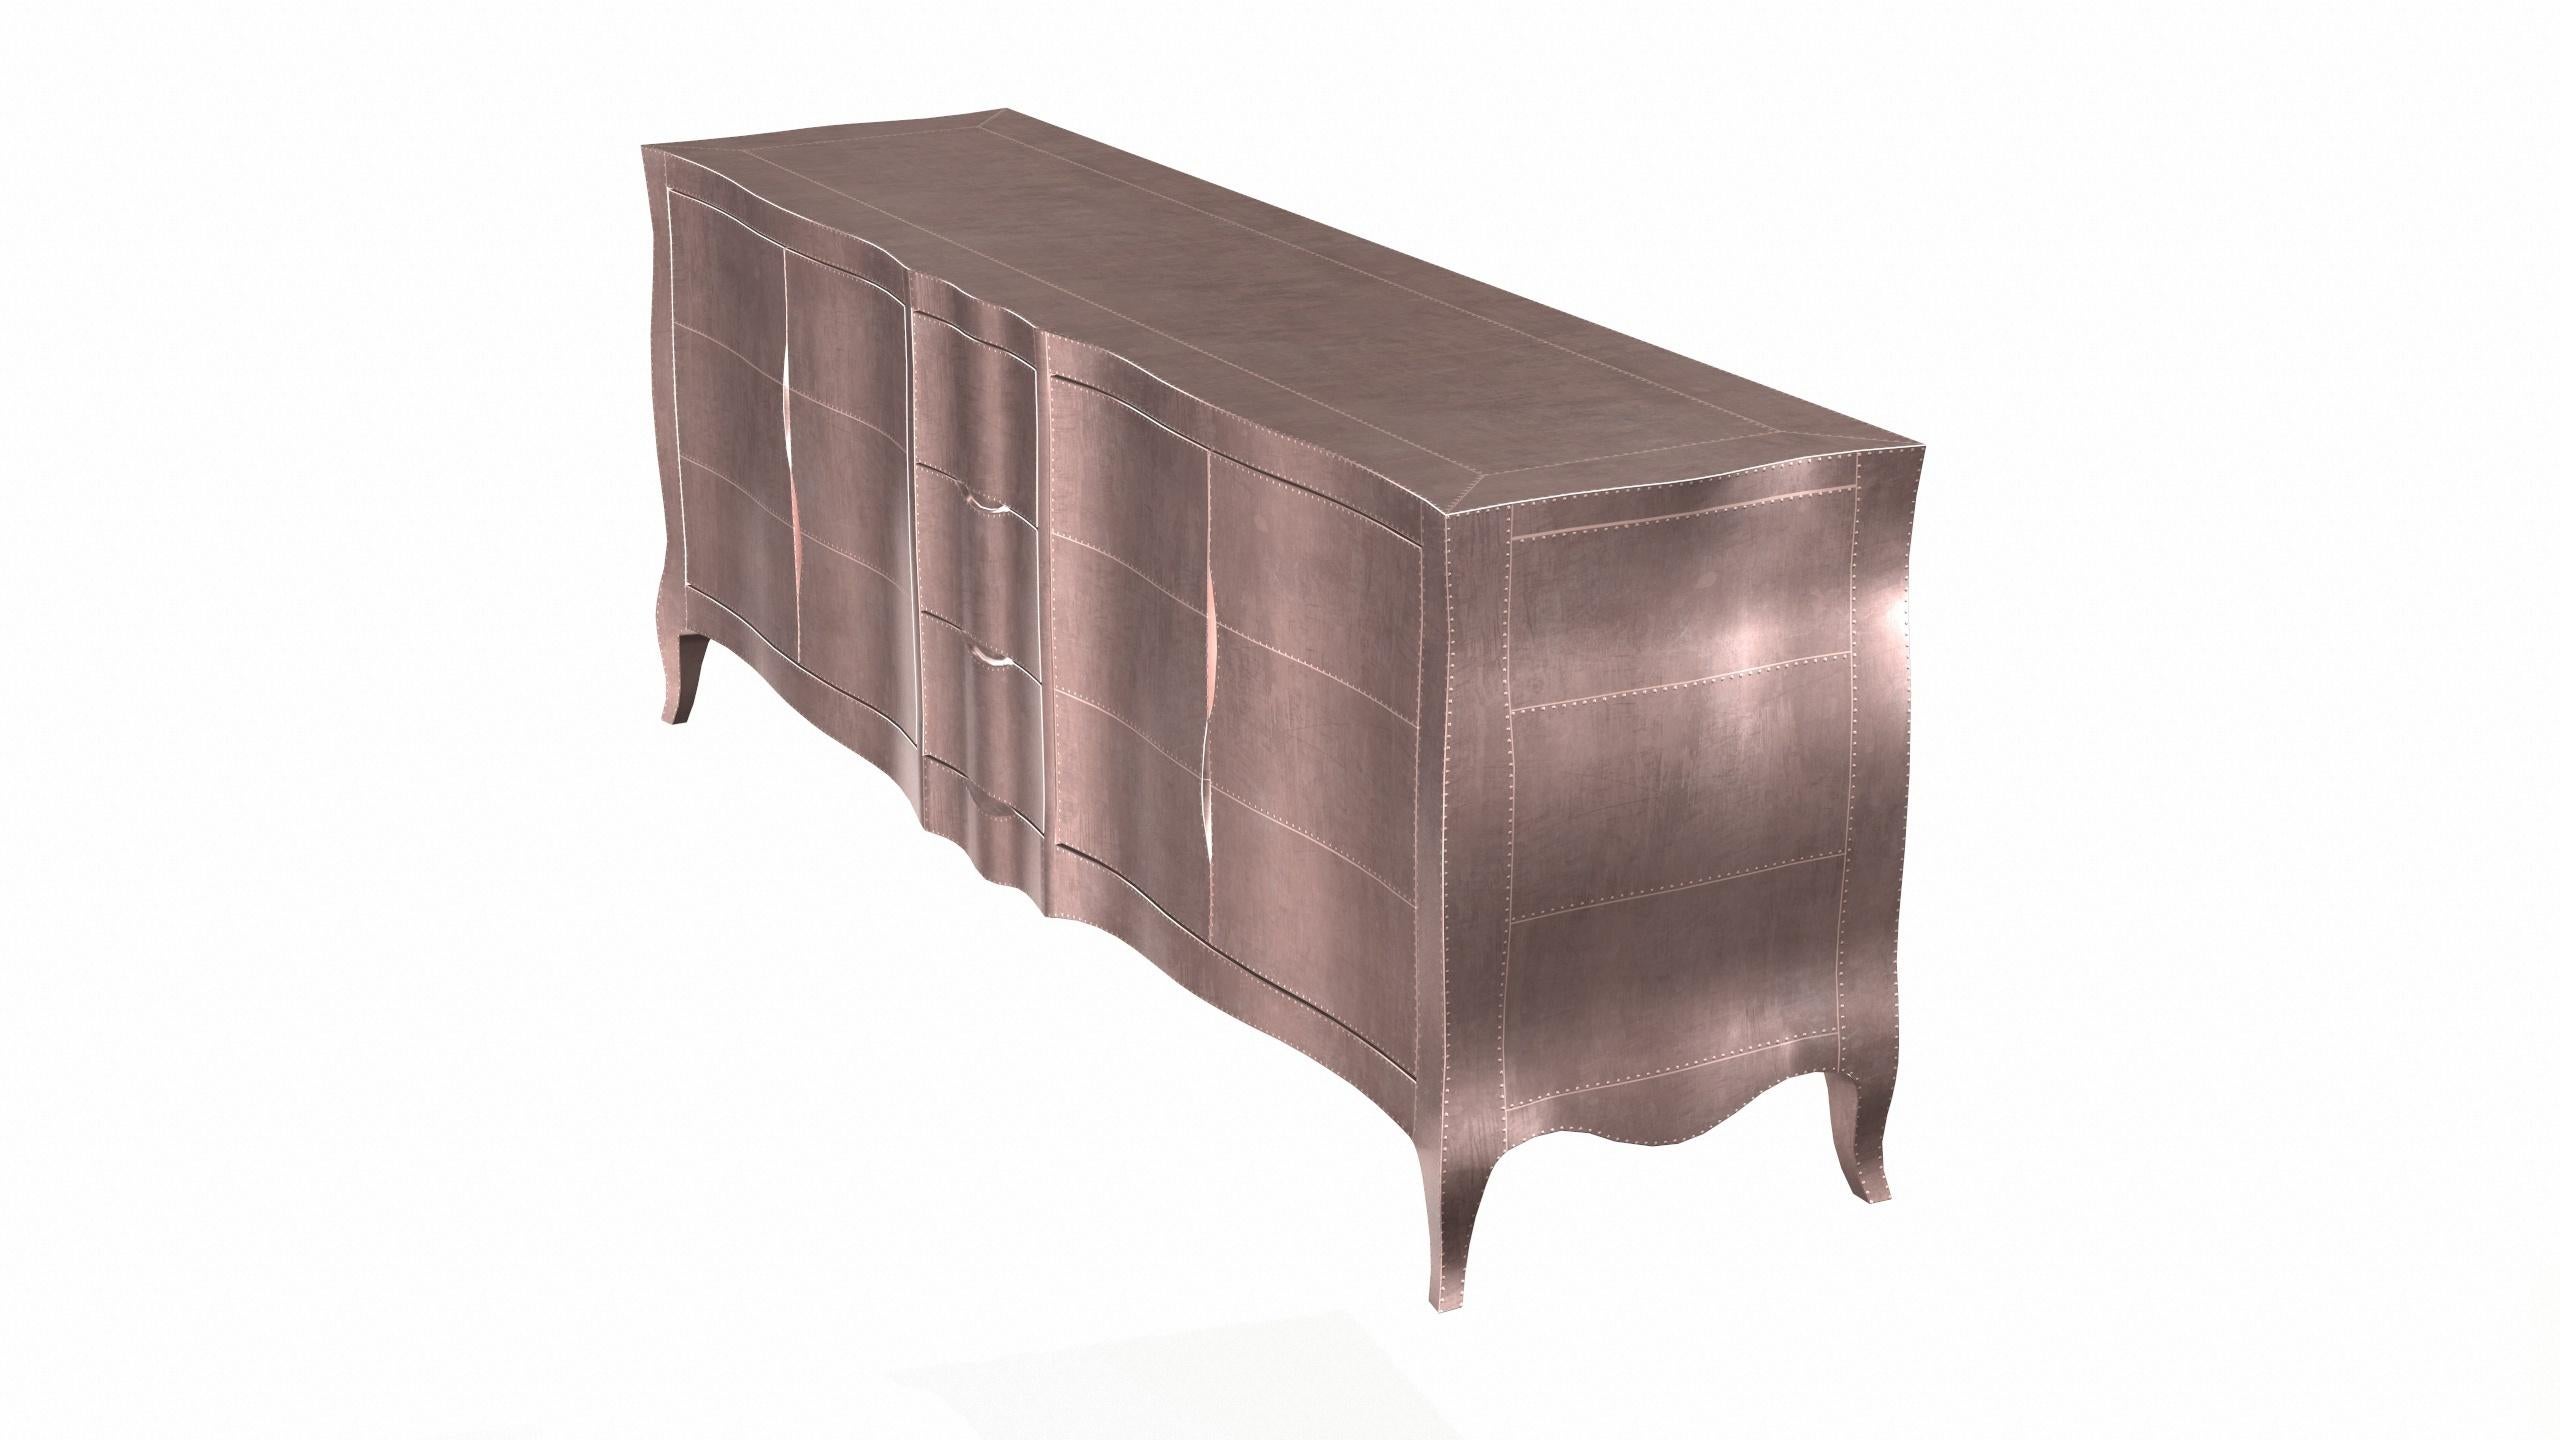 Hand-Carved Louise Credenza Art Deco Sideboards in Smooth Copper by Paul Mathieu  For Sale